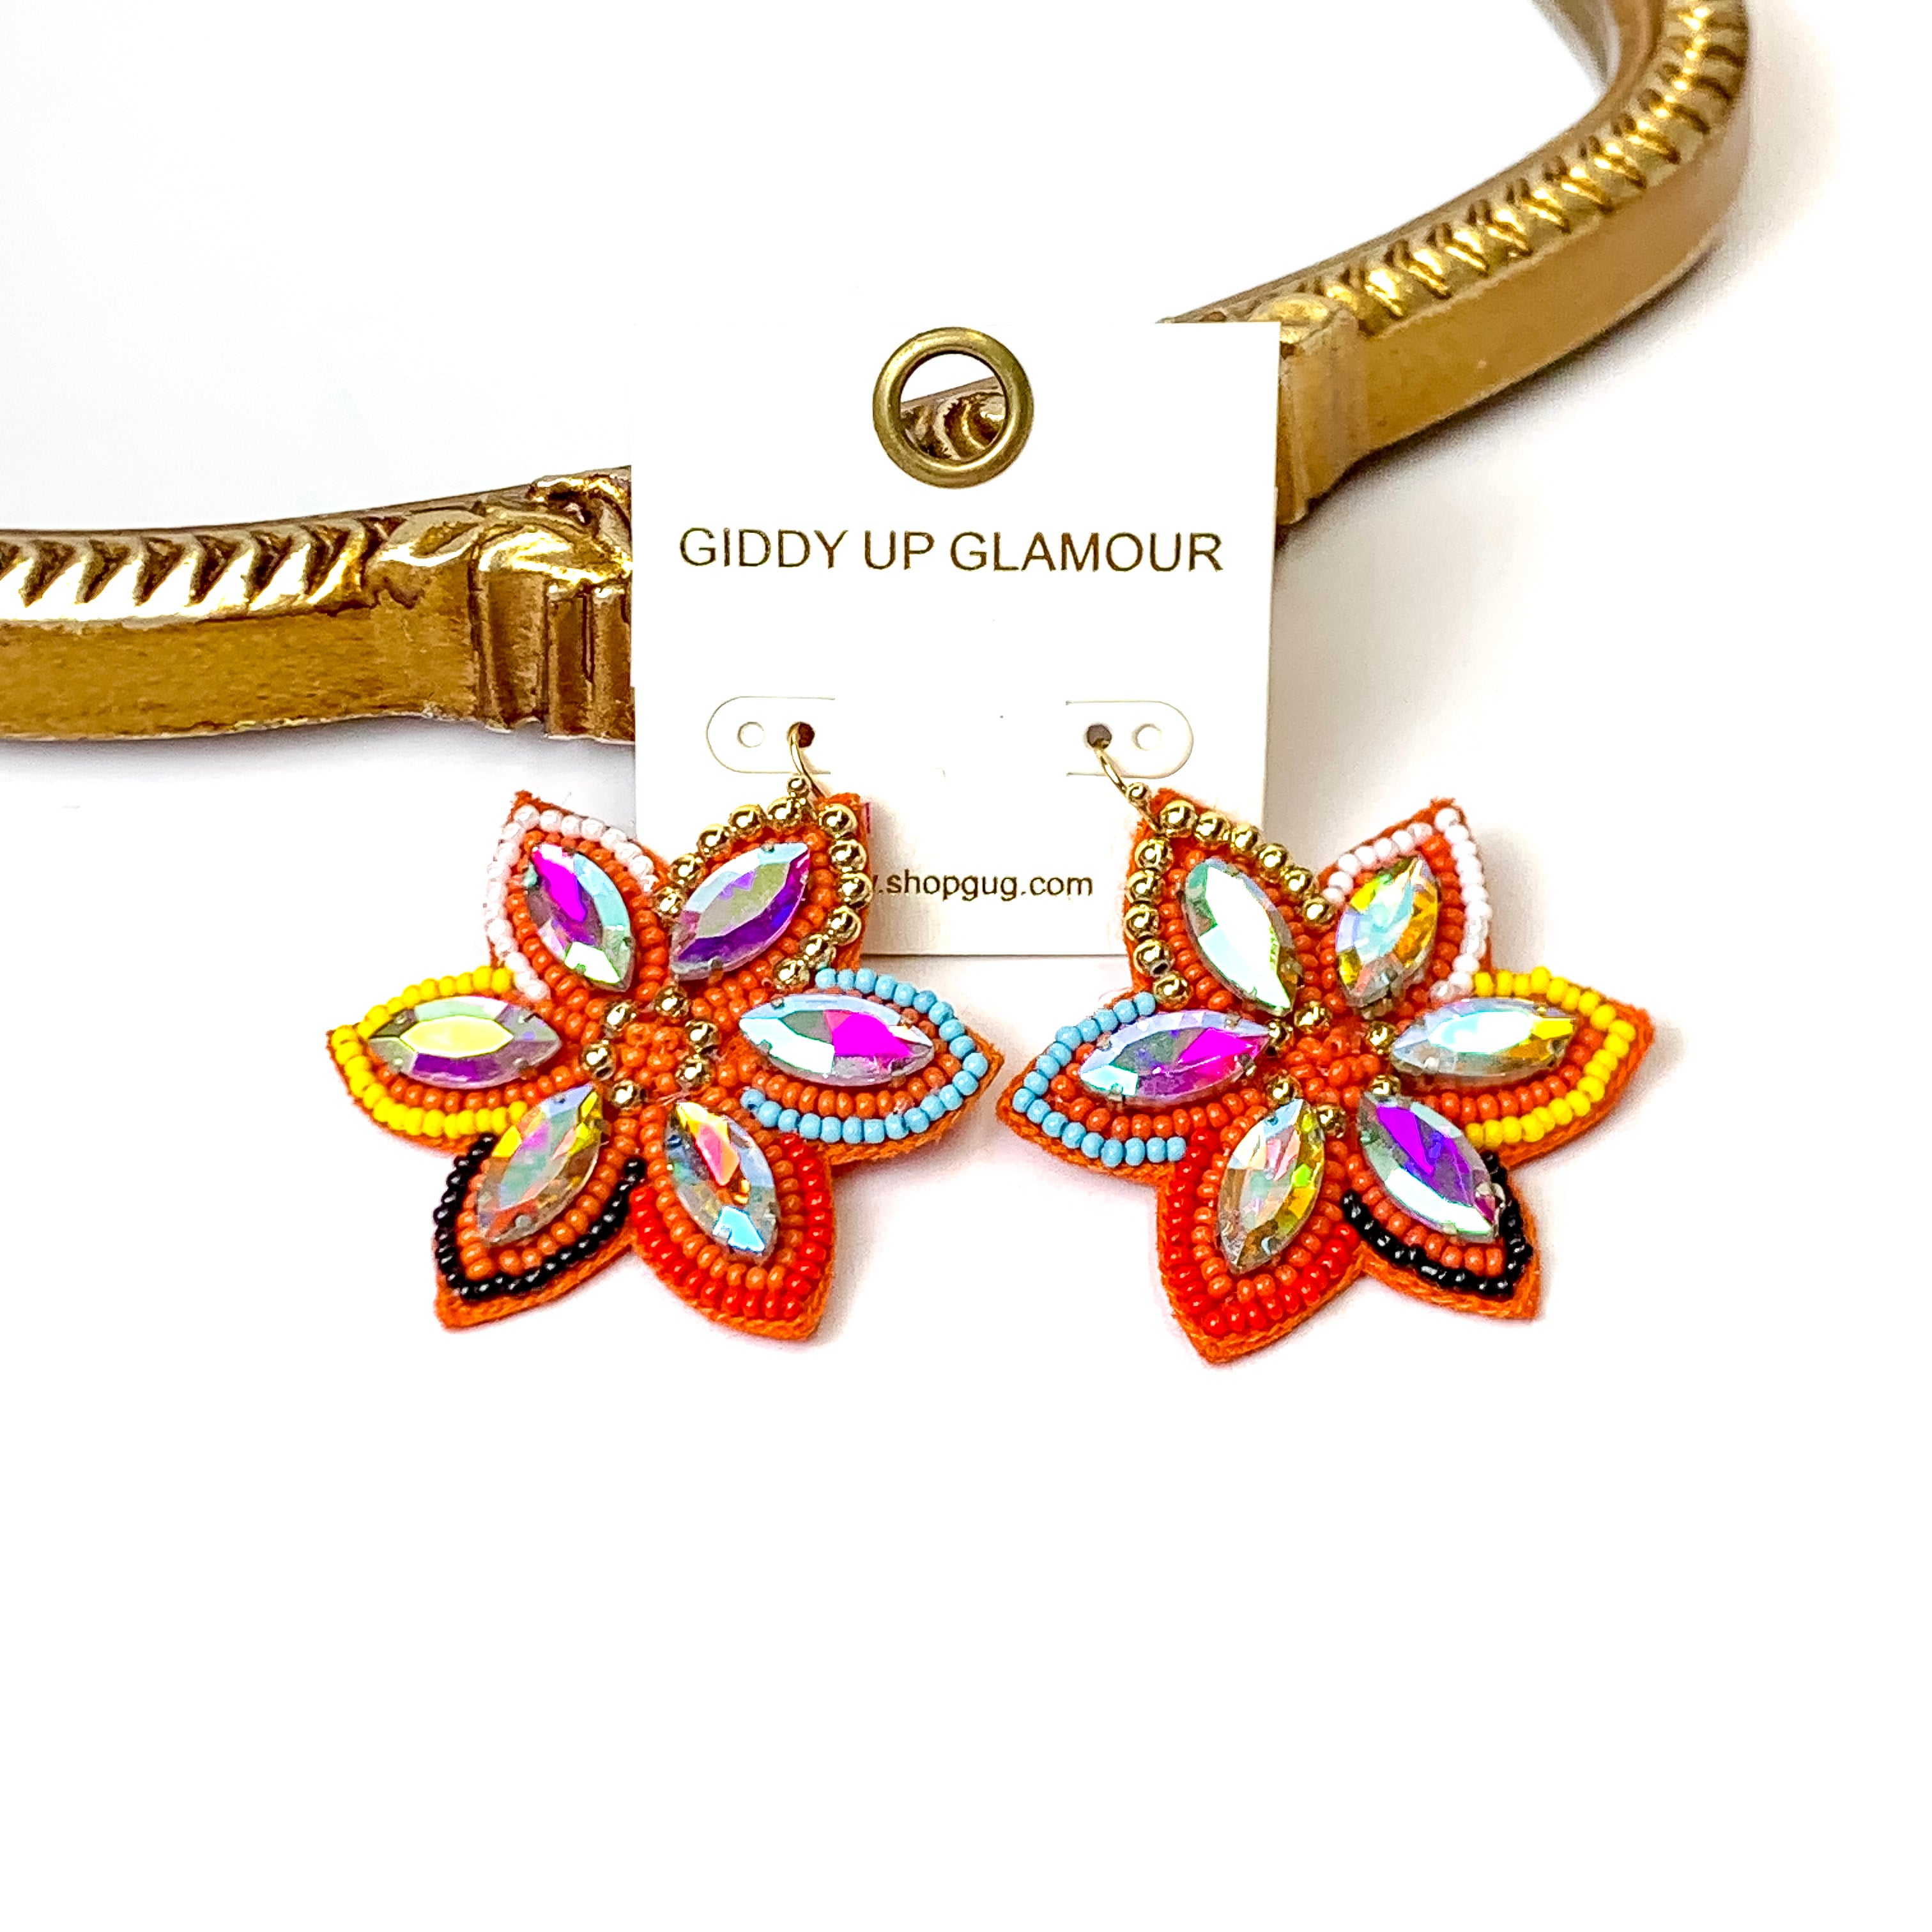 Desert Daisy Multicolored Flower Shaped Earrings with AB Crystal Accents in Red